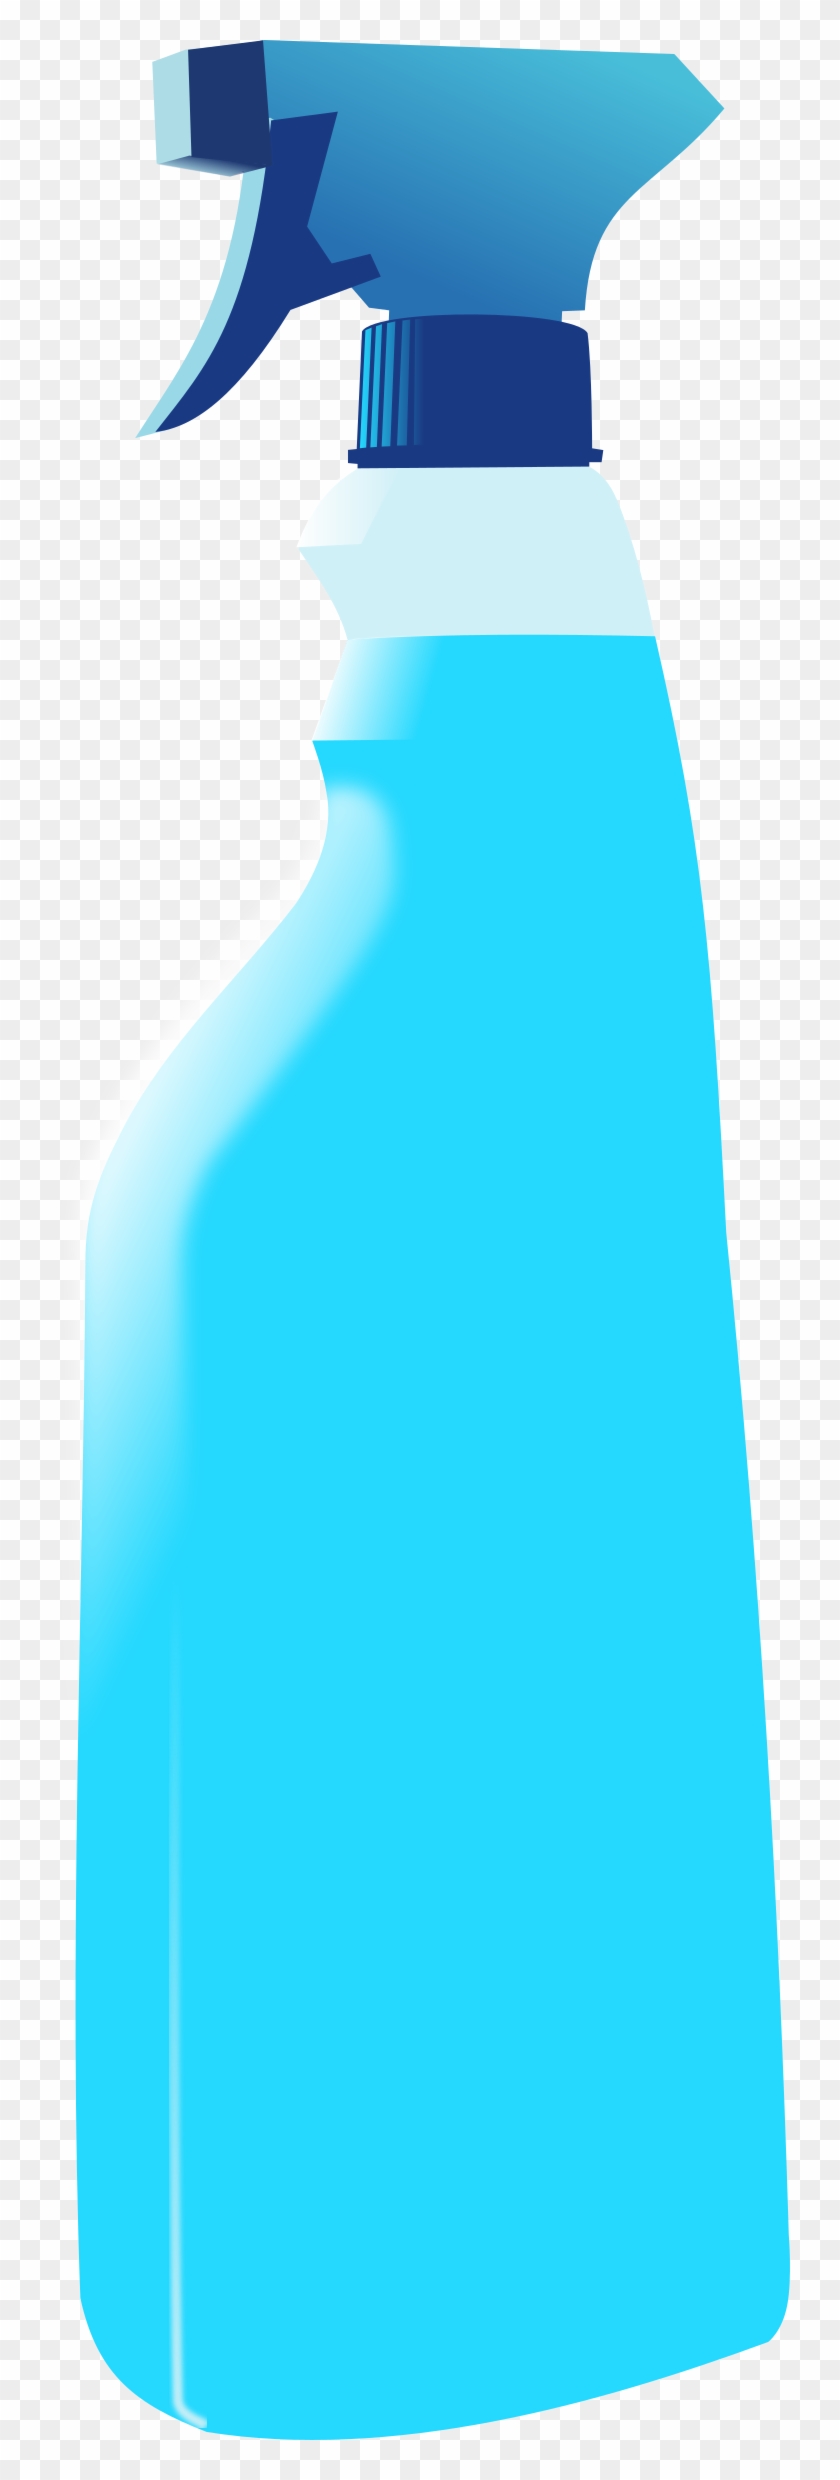 Cleaning Bottle, Plastic, Squirt, Packaging, Cleaning - Cleaning Bottle Png #973147